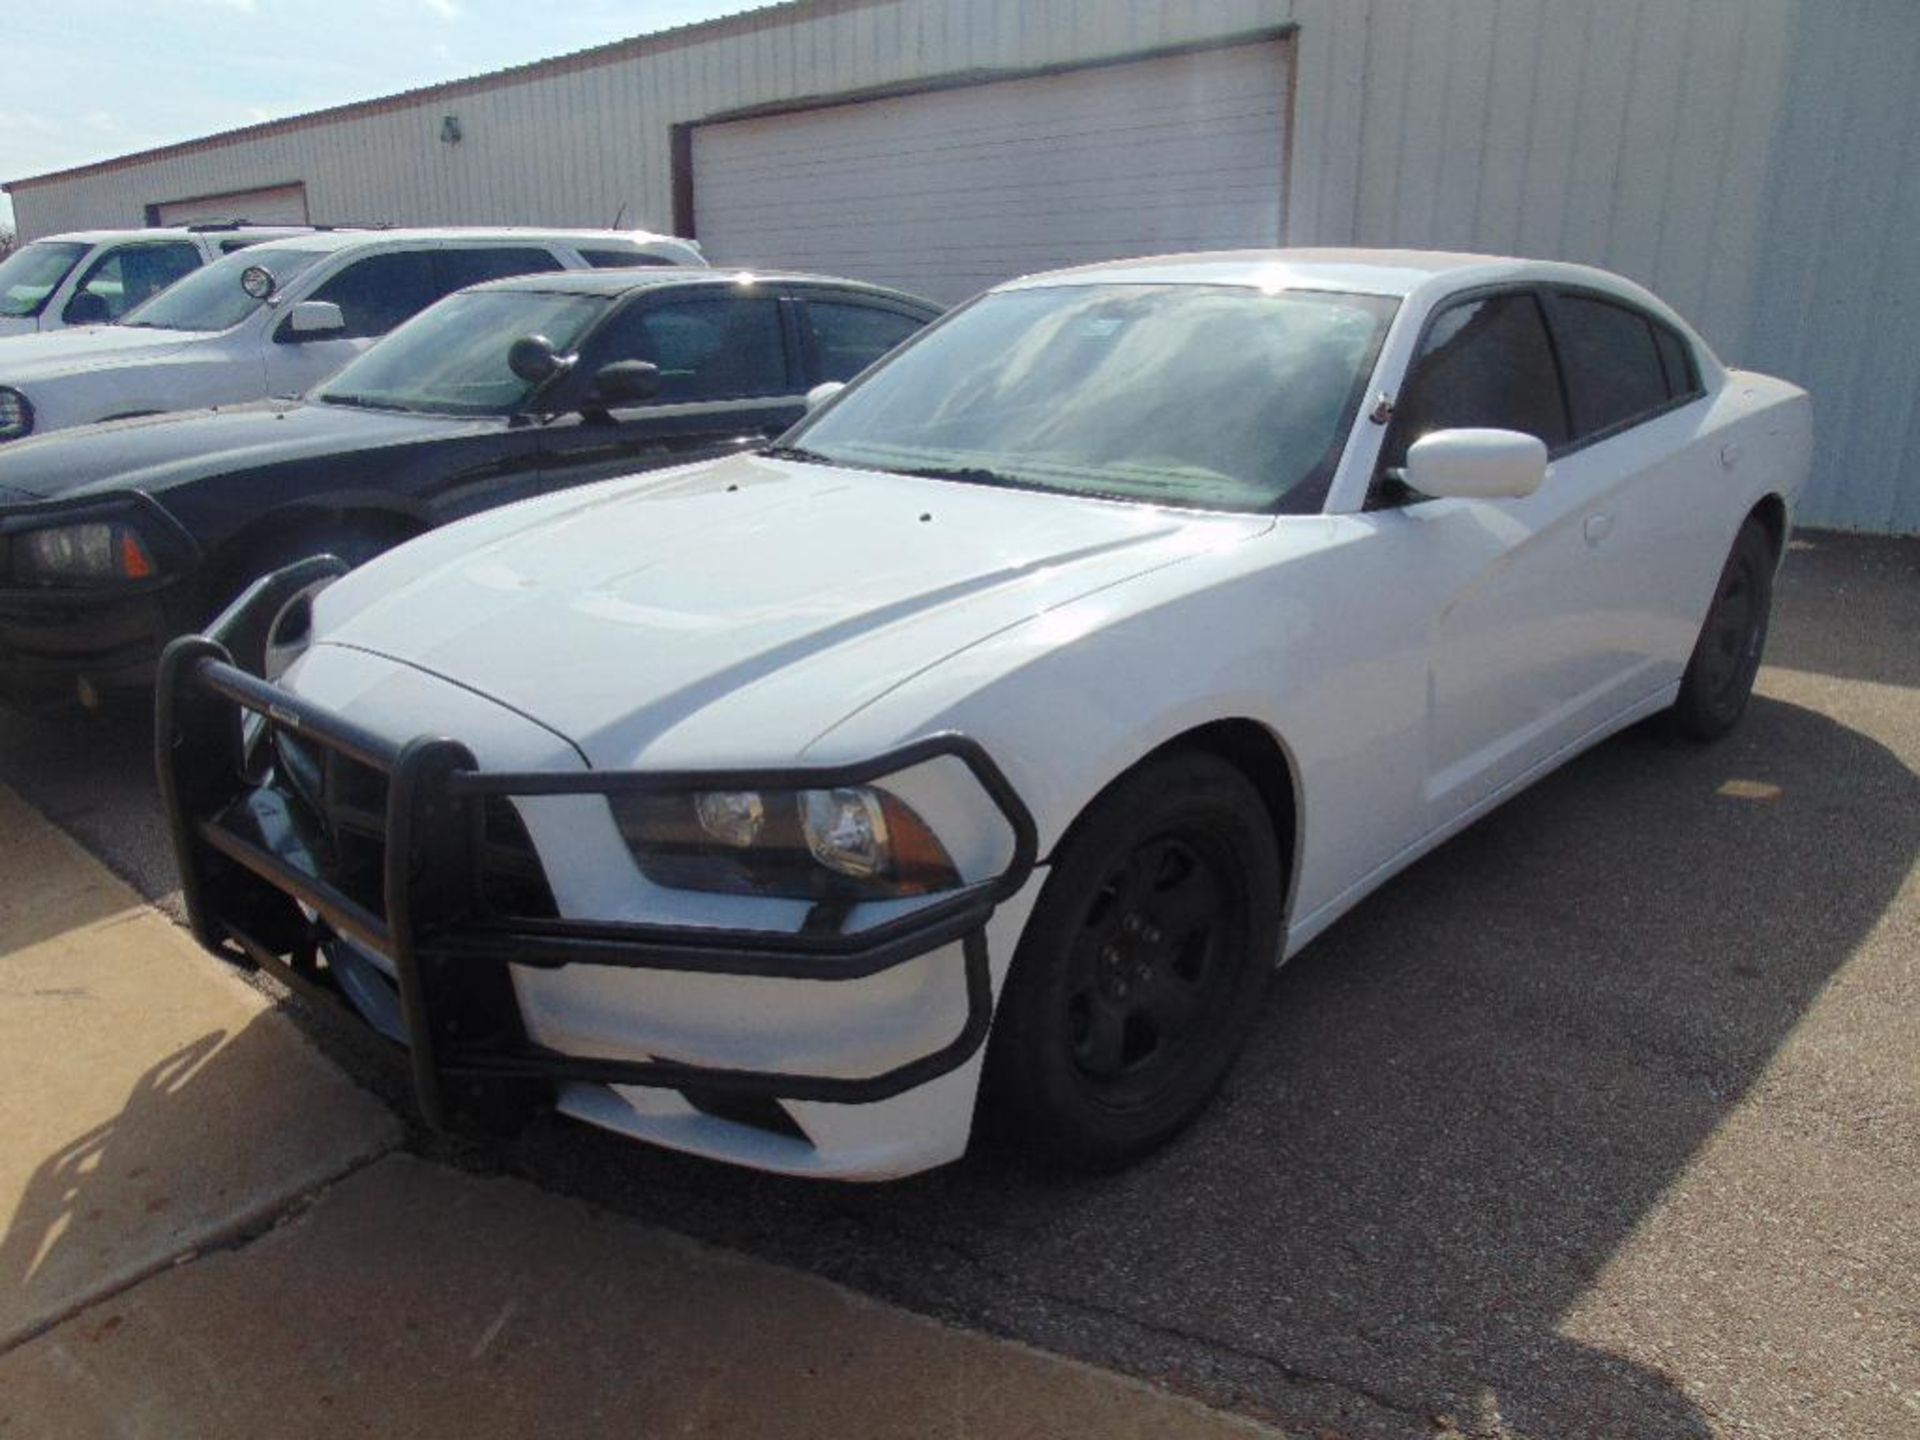 2013 Dodge Charger Car s/n 2c3cdxat4dh629396,v8 eng, auto trans, odometer reads 106475 miles - Image 2 of 7